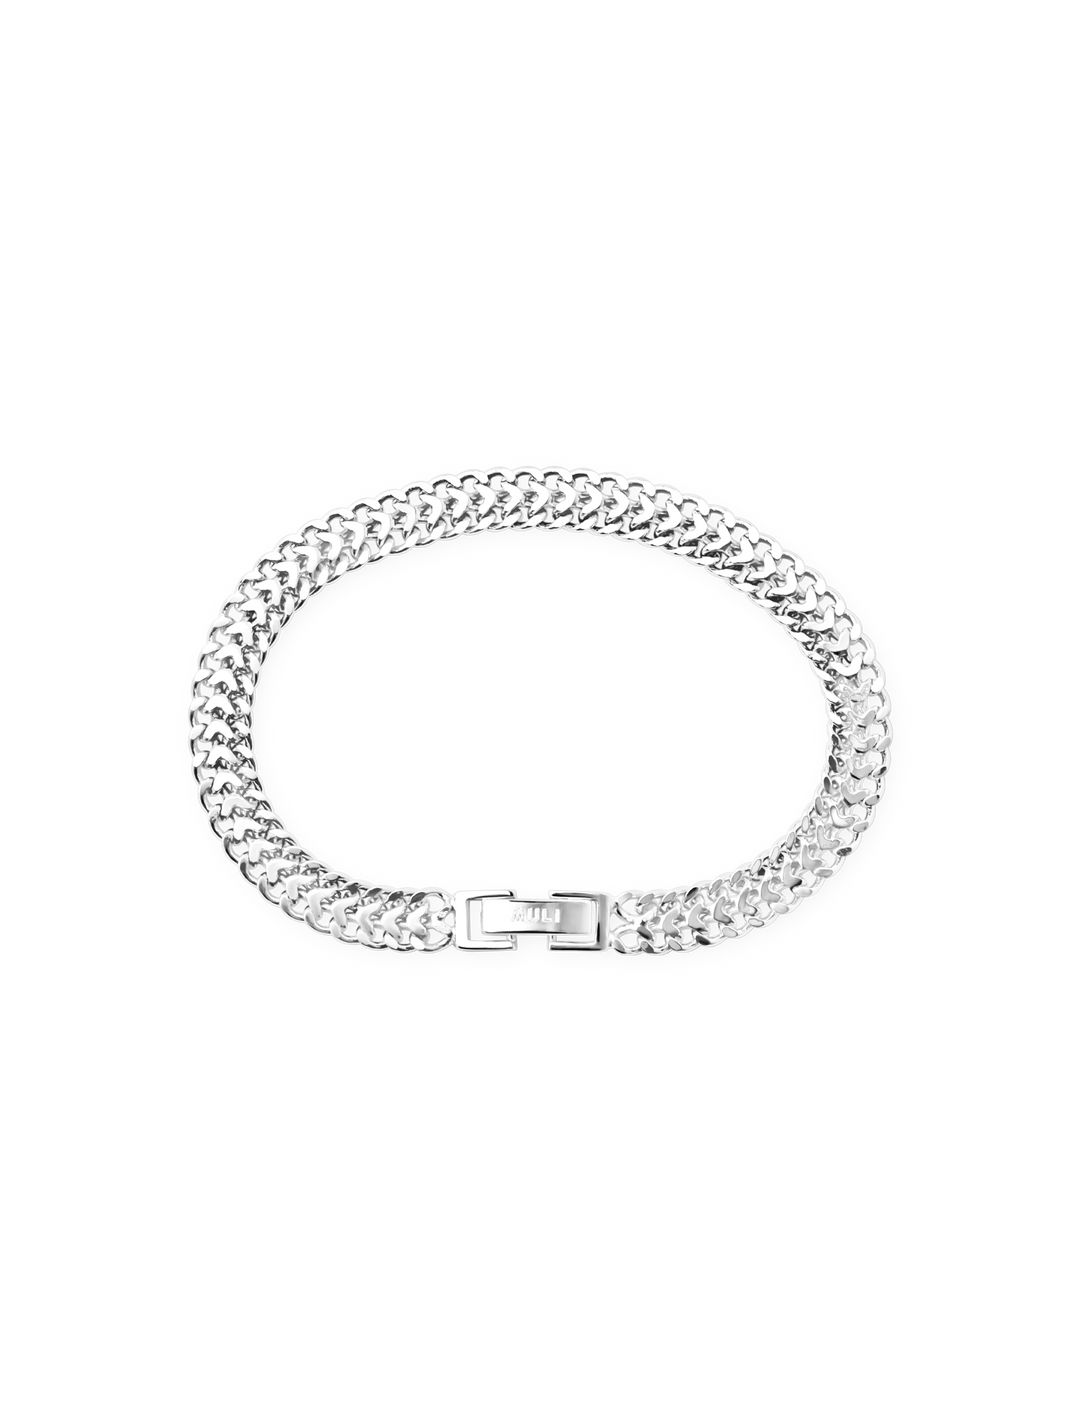 double curb chain bracelet made in 925 sterling silver plated brass